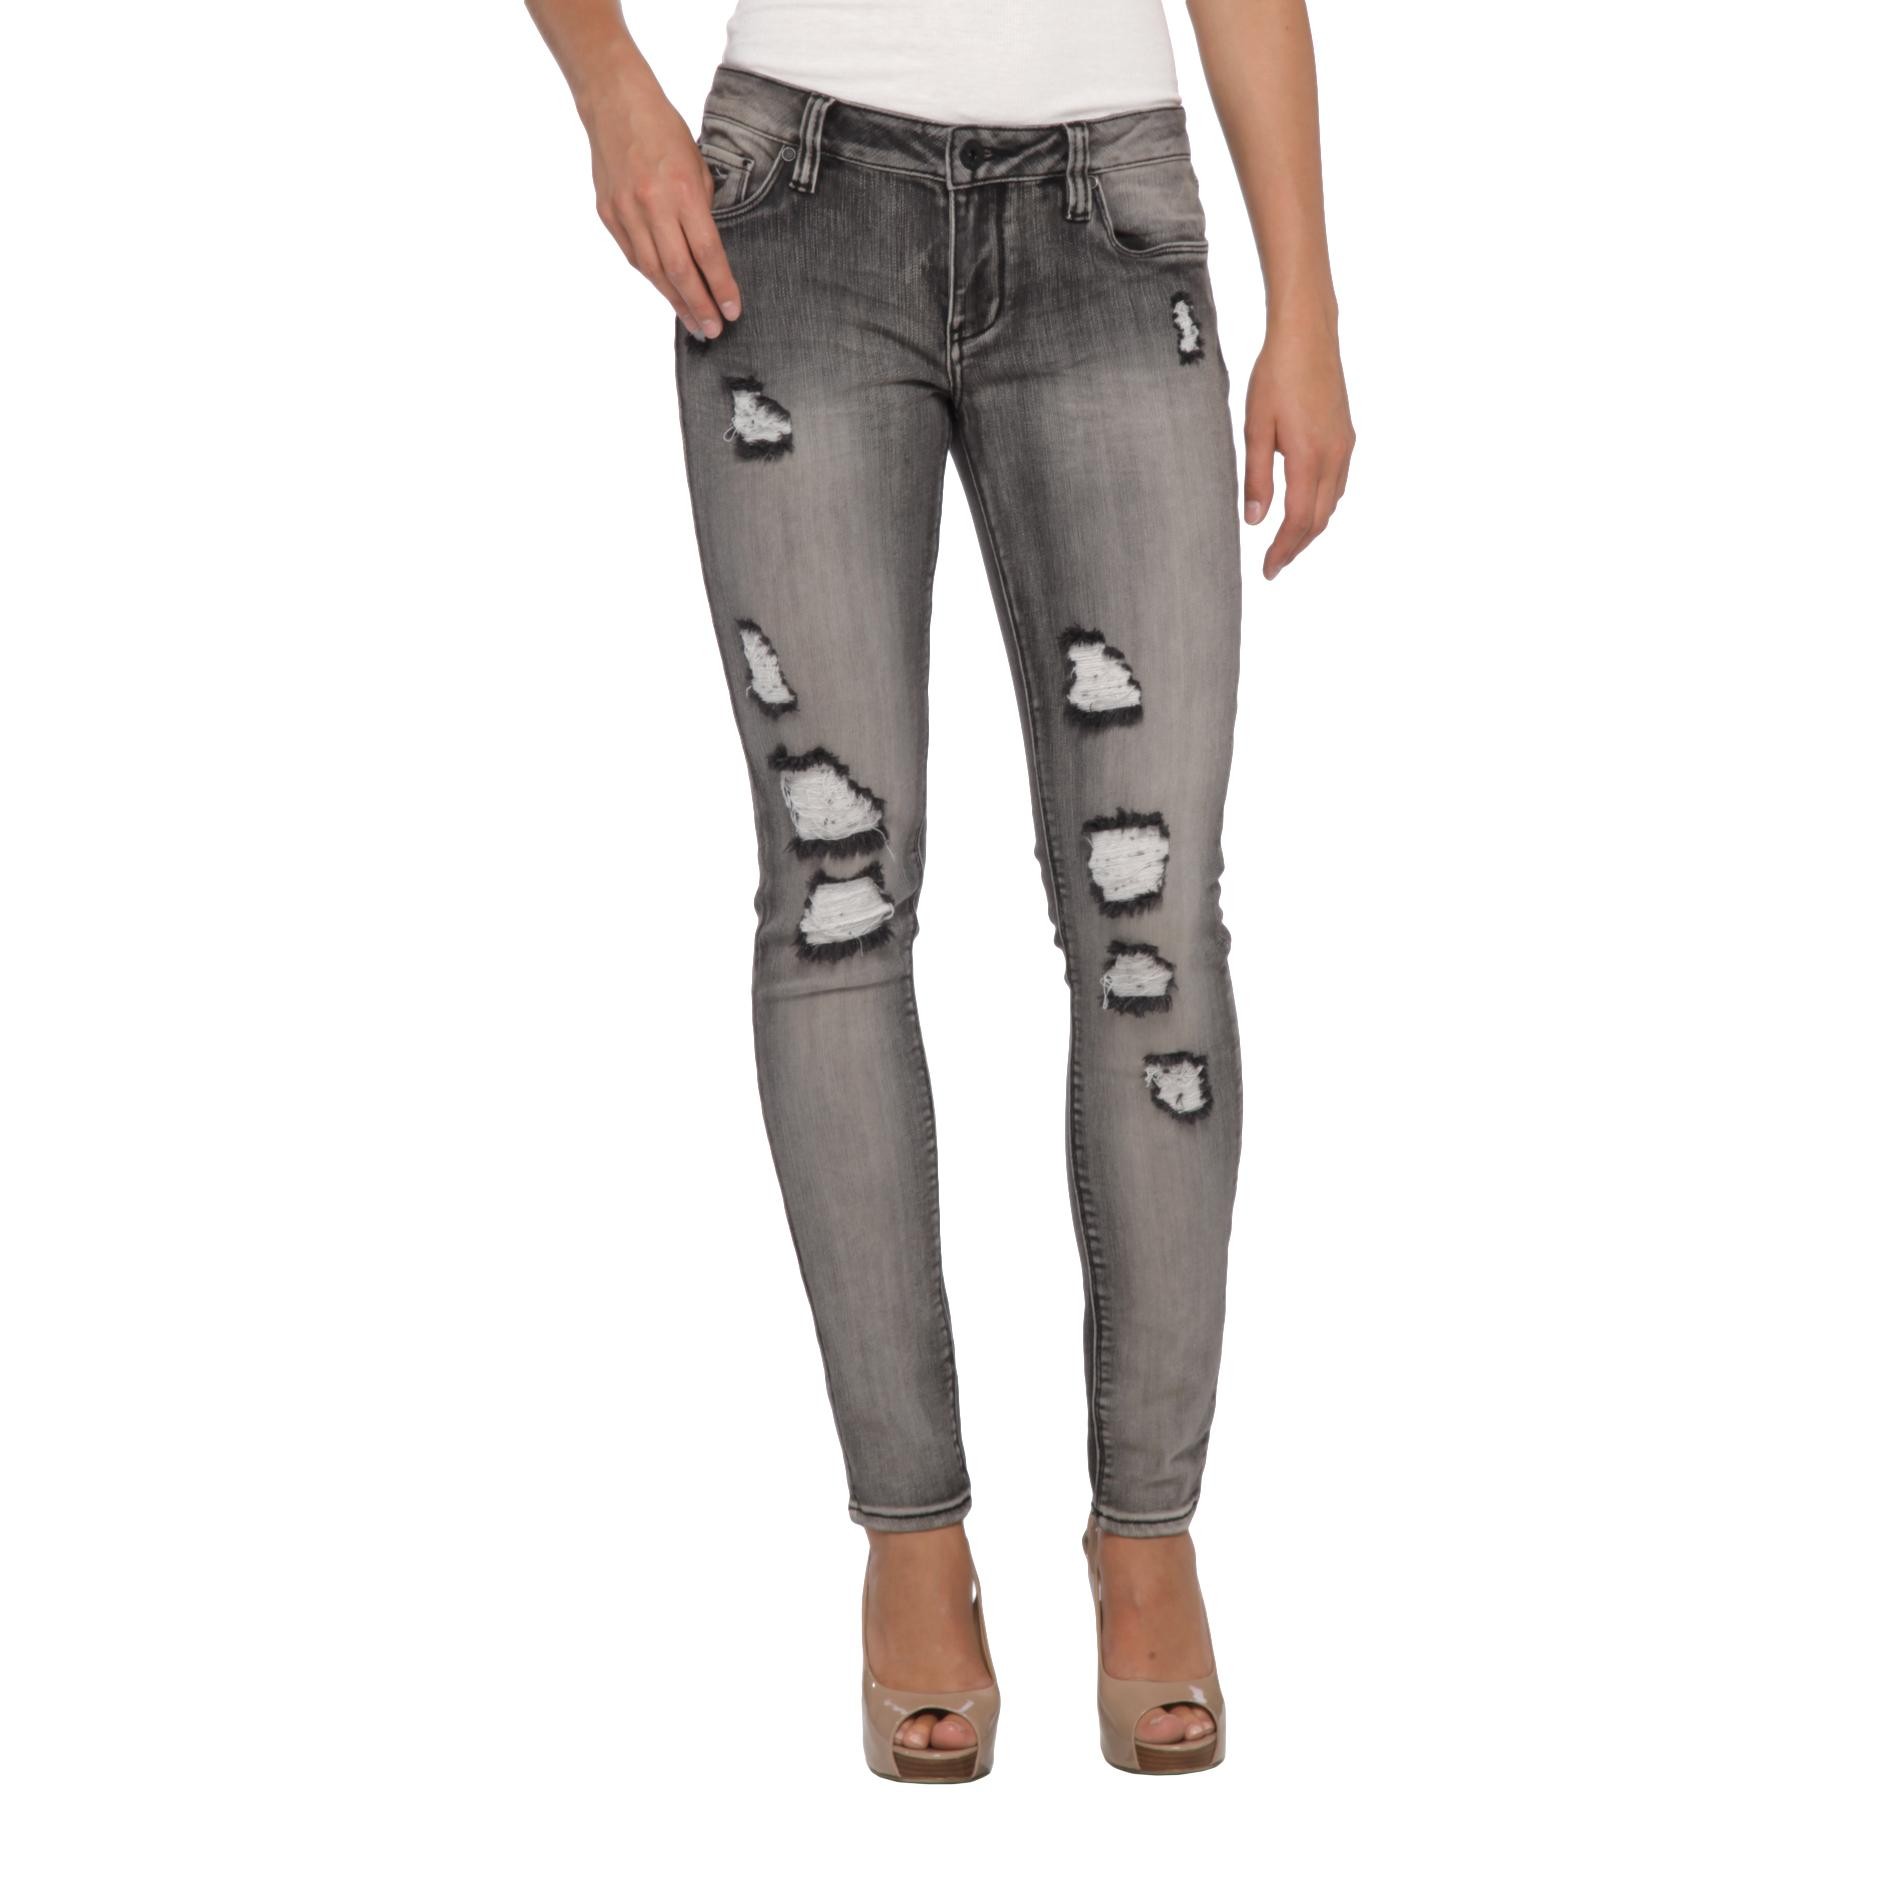 Dollhouse Junior's Deconstructed Skinny Jeans